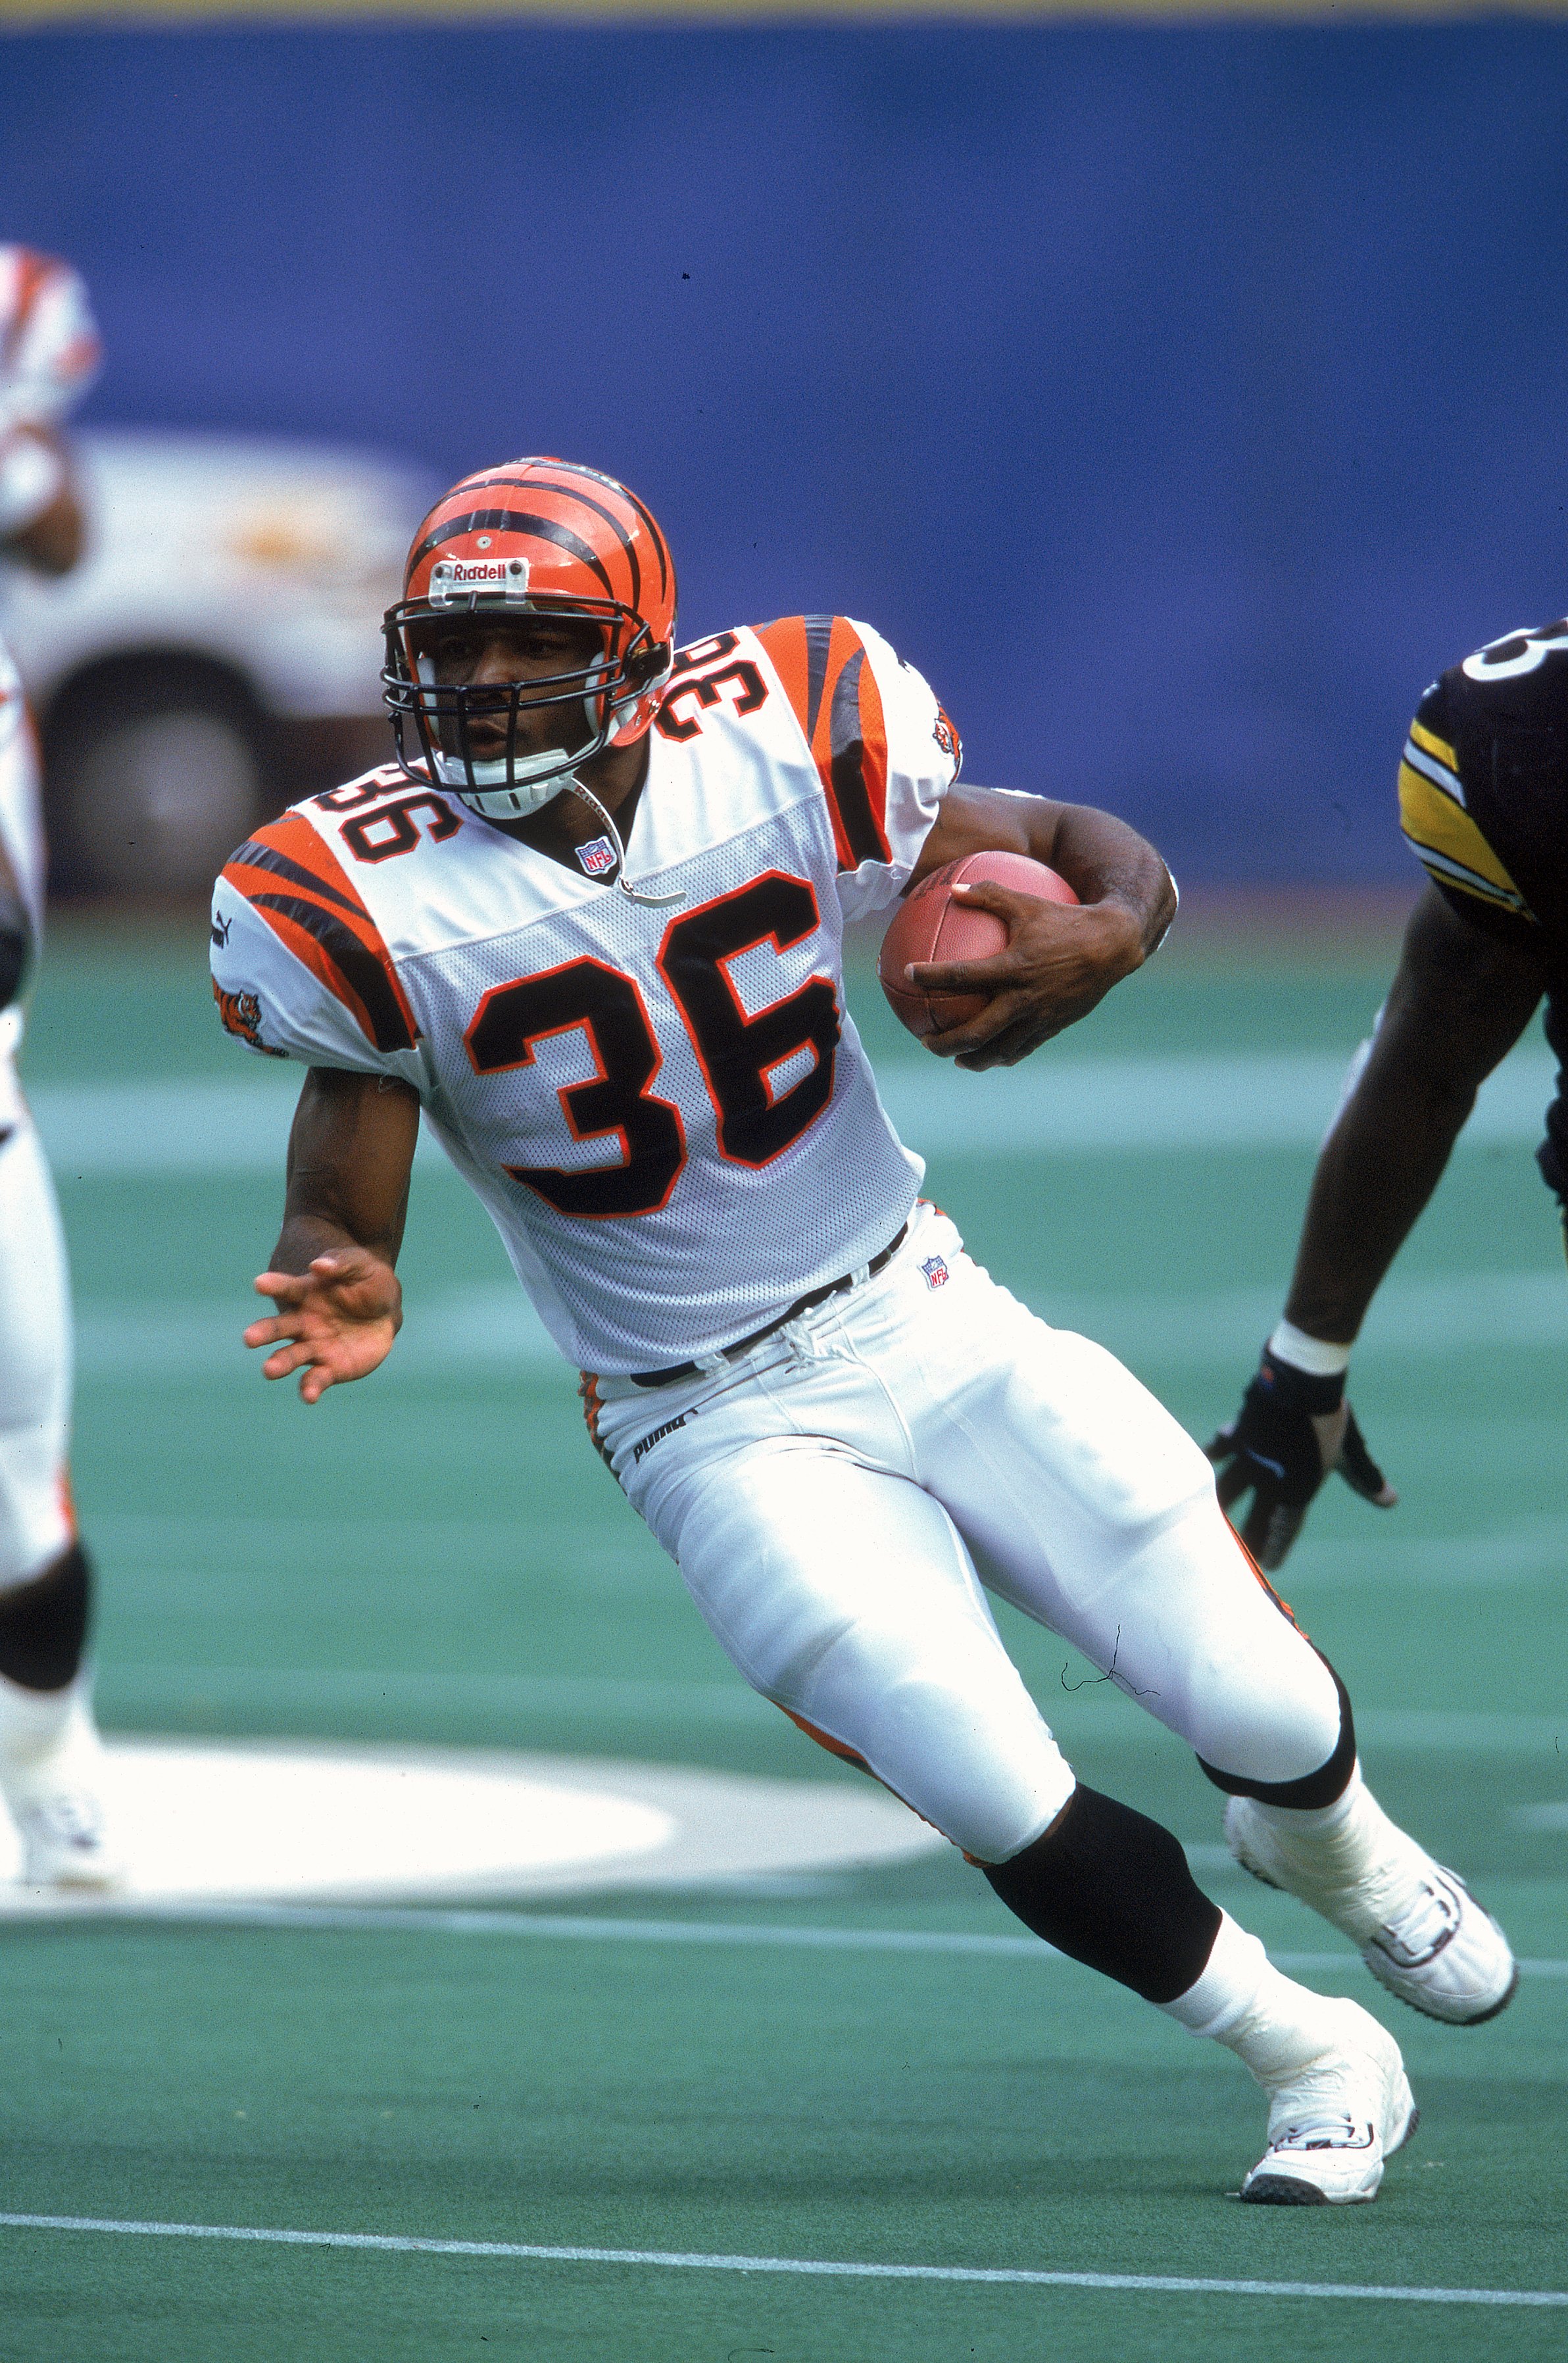 15 Oct 2000: Brandon Bennett #36 of the Cincinnati Bengals carries the ball up the field during a game against the Pittsburgh Steelers at the Three Rivers Stadium in Pittsburgh, Pennsylvaina. The Steelers defeated the Bengals 15-0.Mandatory Credit: Tom Pi